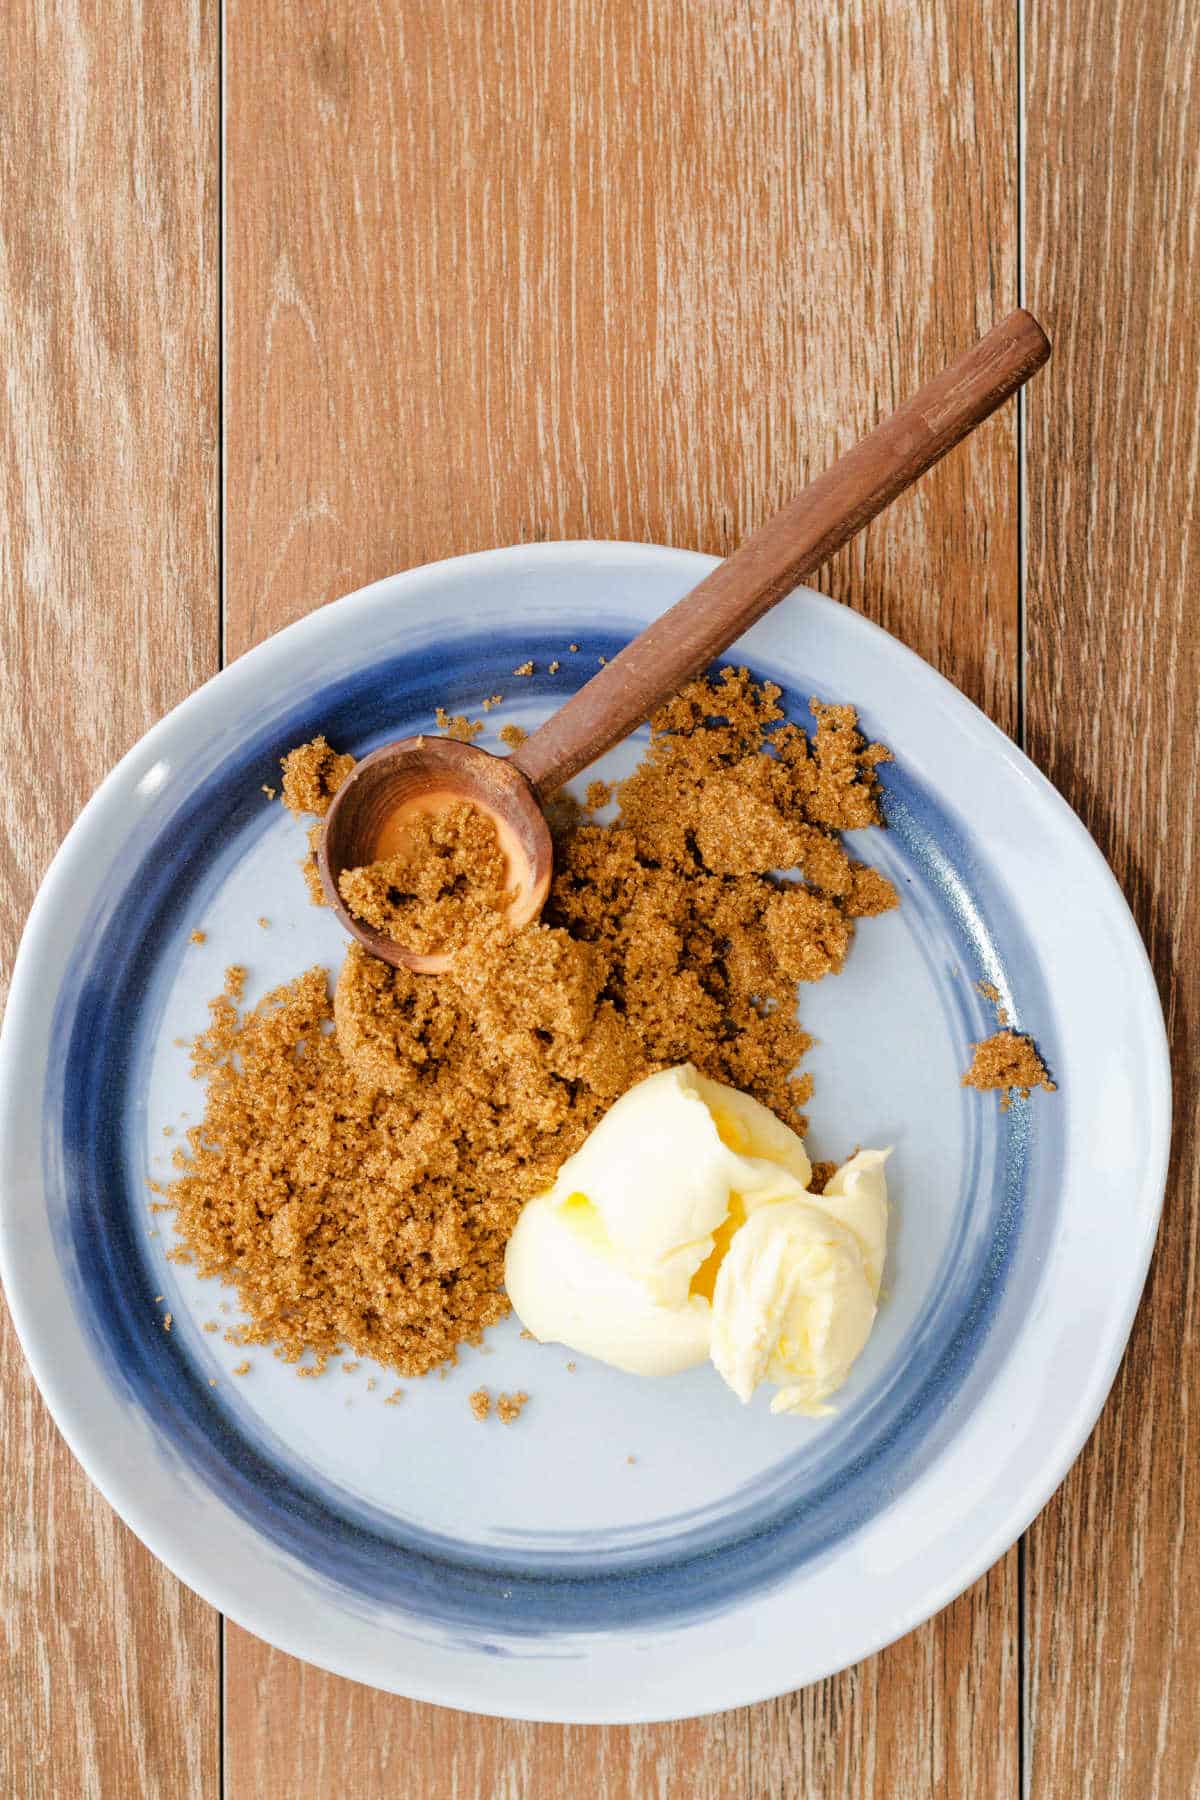 An overhead shot of a blue plate with a wooden spoon, dark brown sugar, and butter.